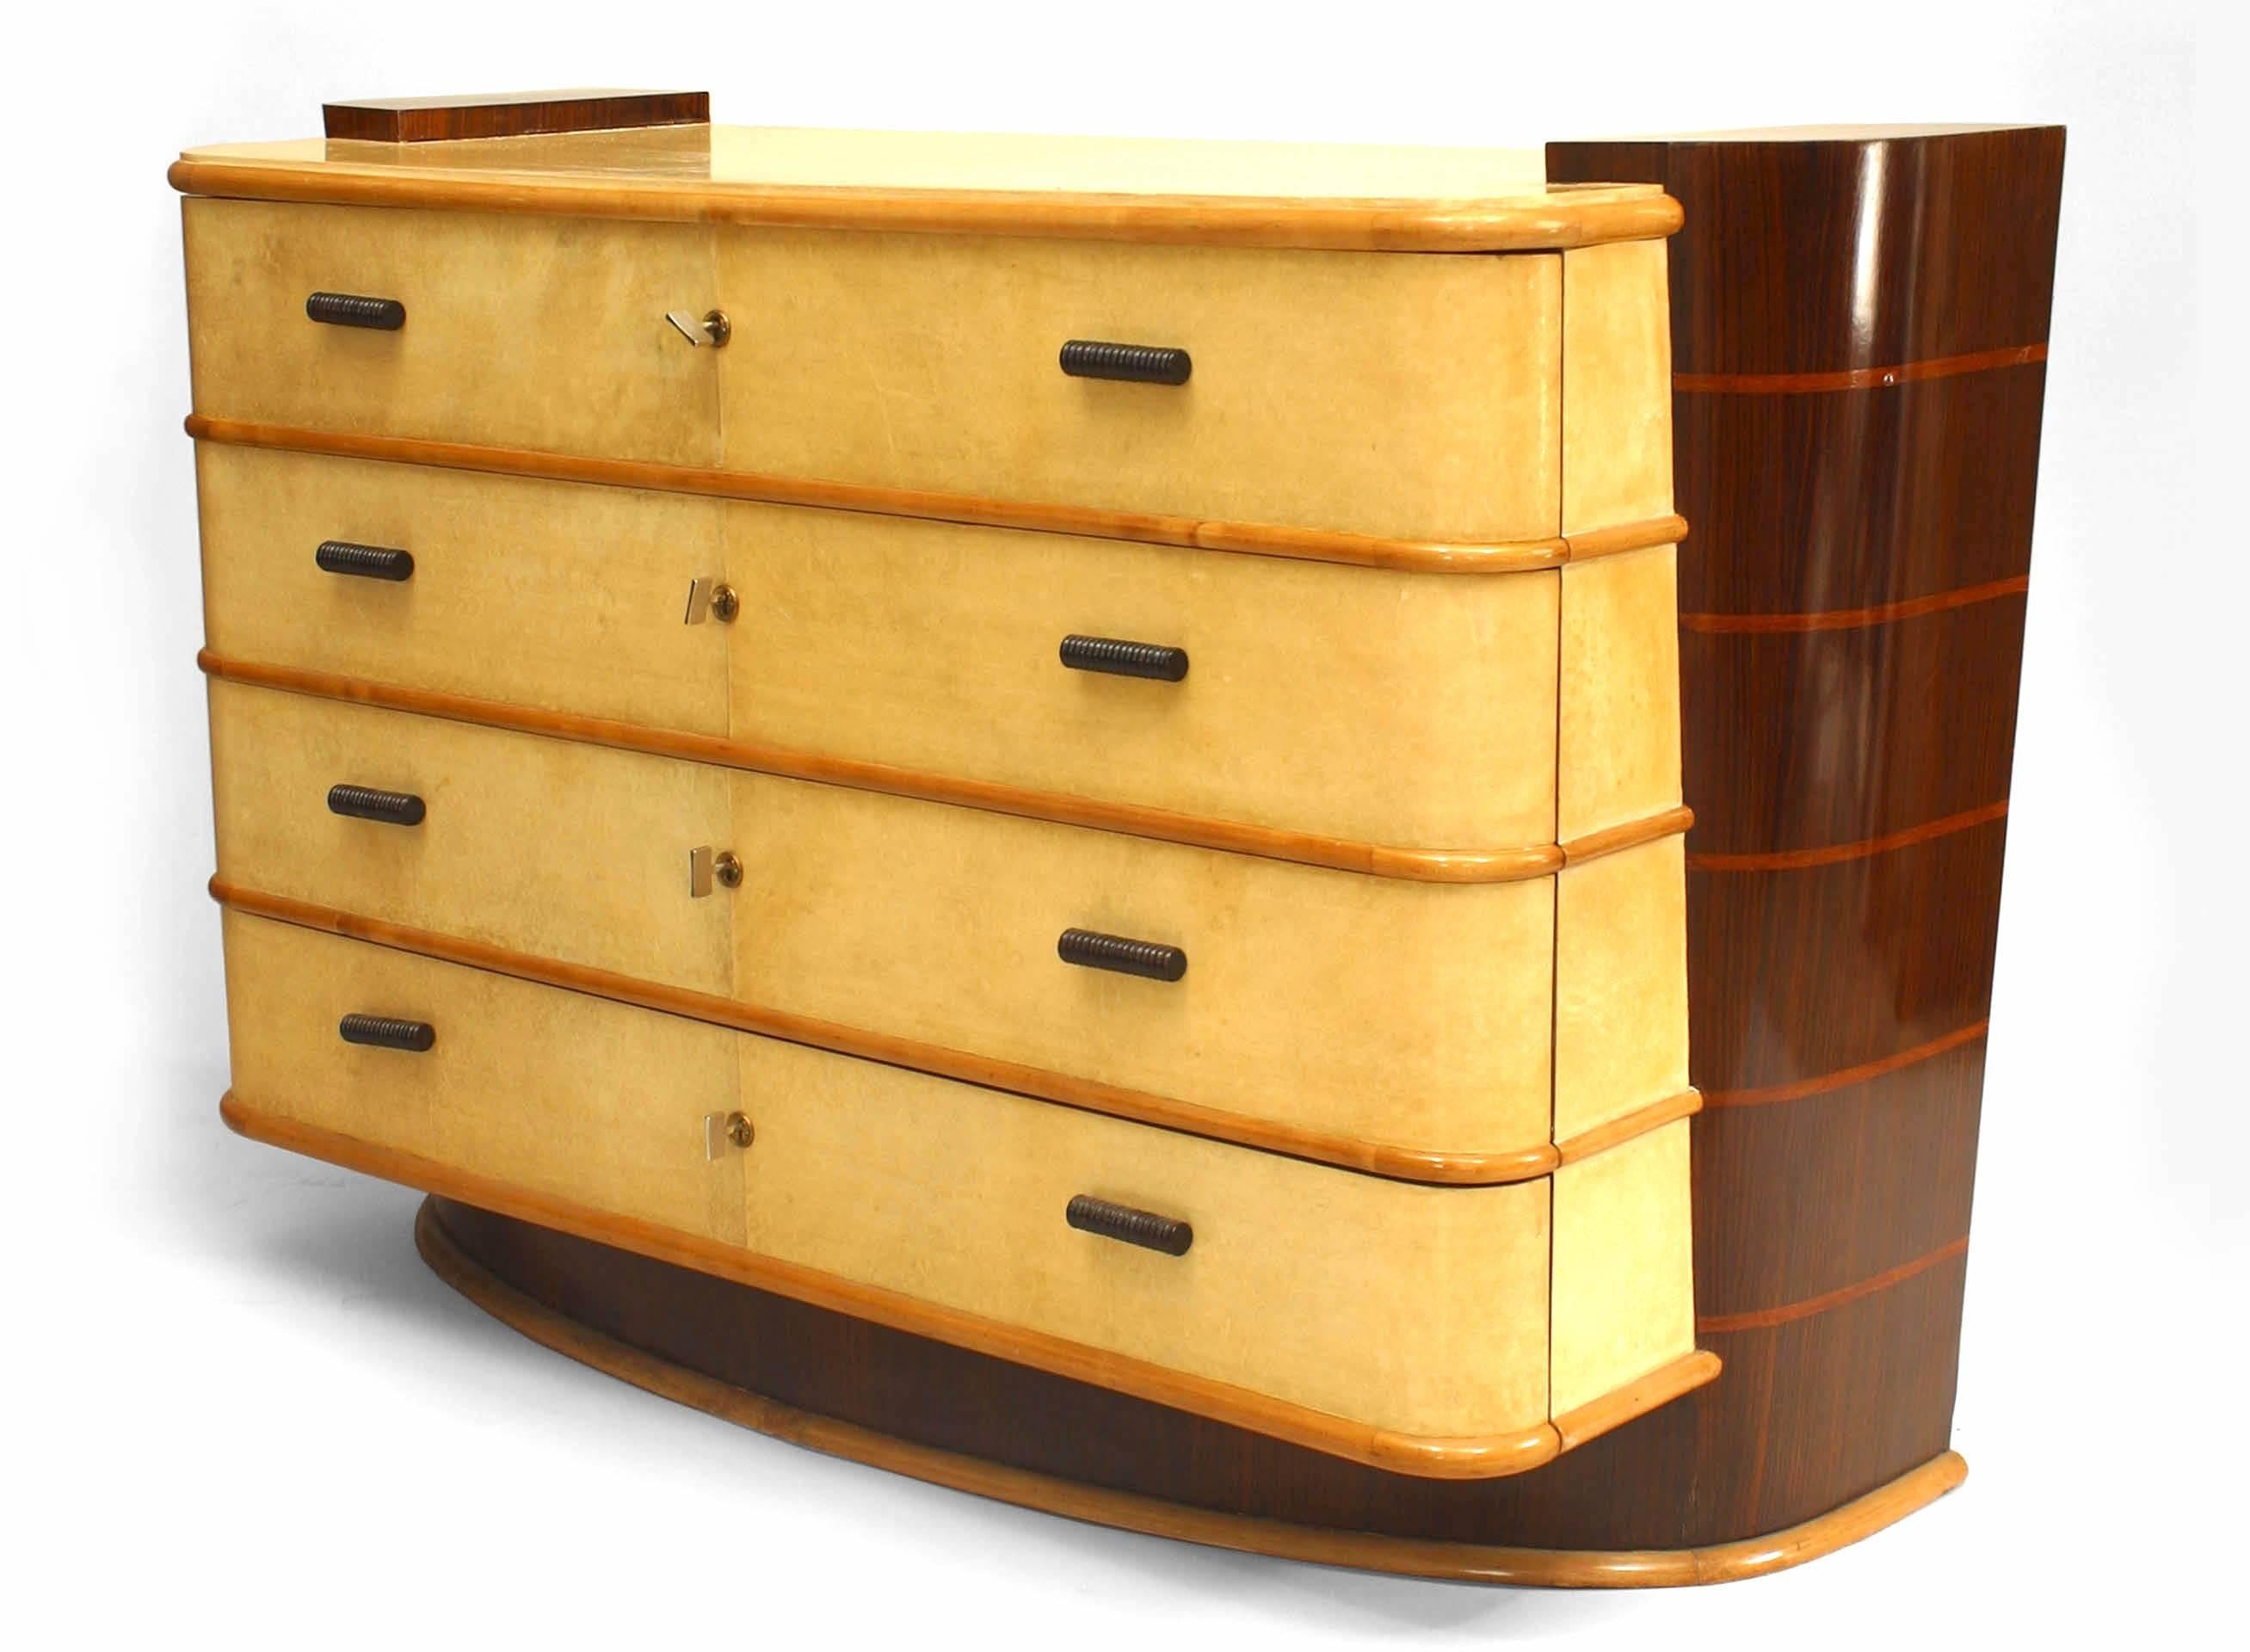 Italian 1940s parchment veneer chest of drawers with rosewood & banded inlaid mahogany sides & platform top sections with maple trimmed drawers (design attributed to PAOLO BUFFA) (probably made by OSVALDO BORSANI)
